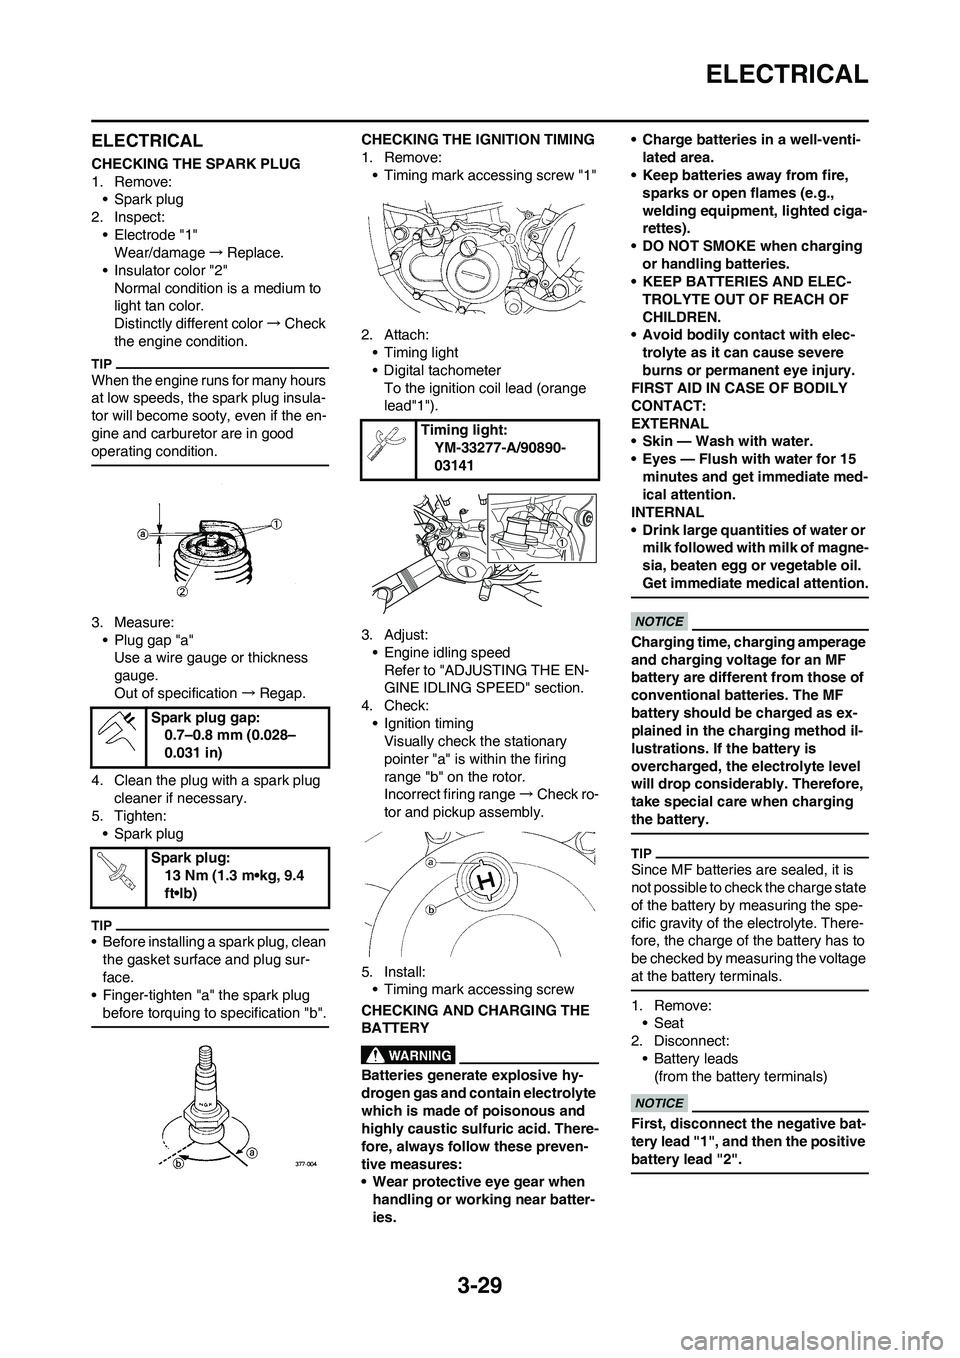 YAMAHA WR 450F 2010 Owners Manual 3-29
ELECTRICAL
ELECTRICAL
CHECKING THE SPARK PLUG
1. Remove:
• Spark plug
2. Inspect:
• Electrode "1"
Wear/damage→Replace.
• Insulator color "2"
Normal condition is a medium to 
light tan col